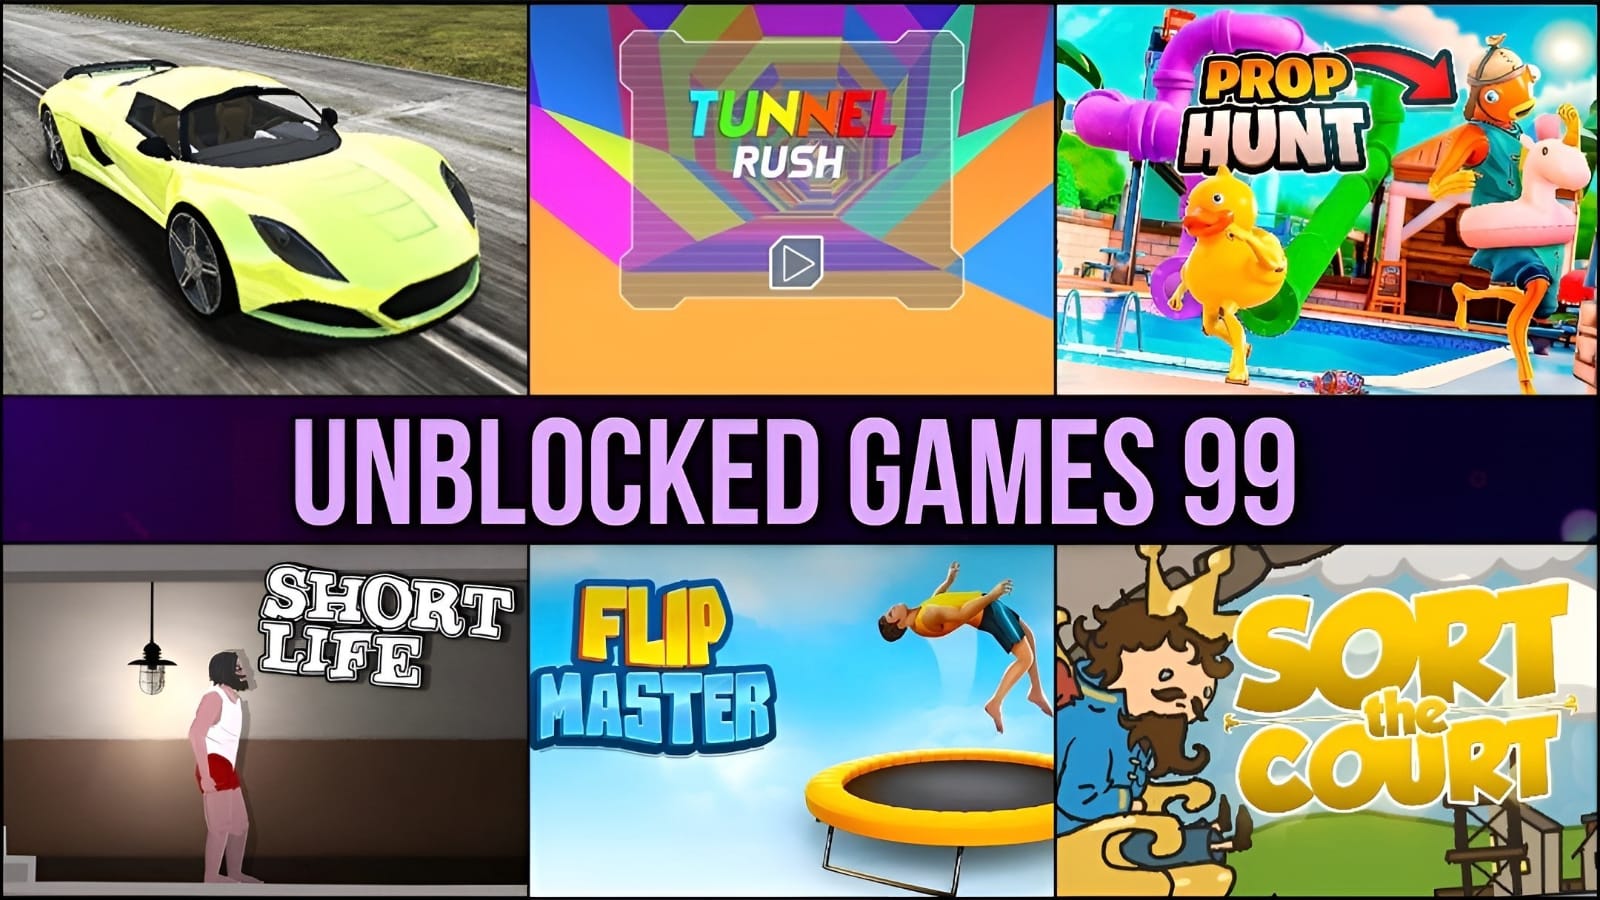 Unblocked Games 99